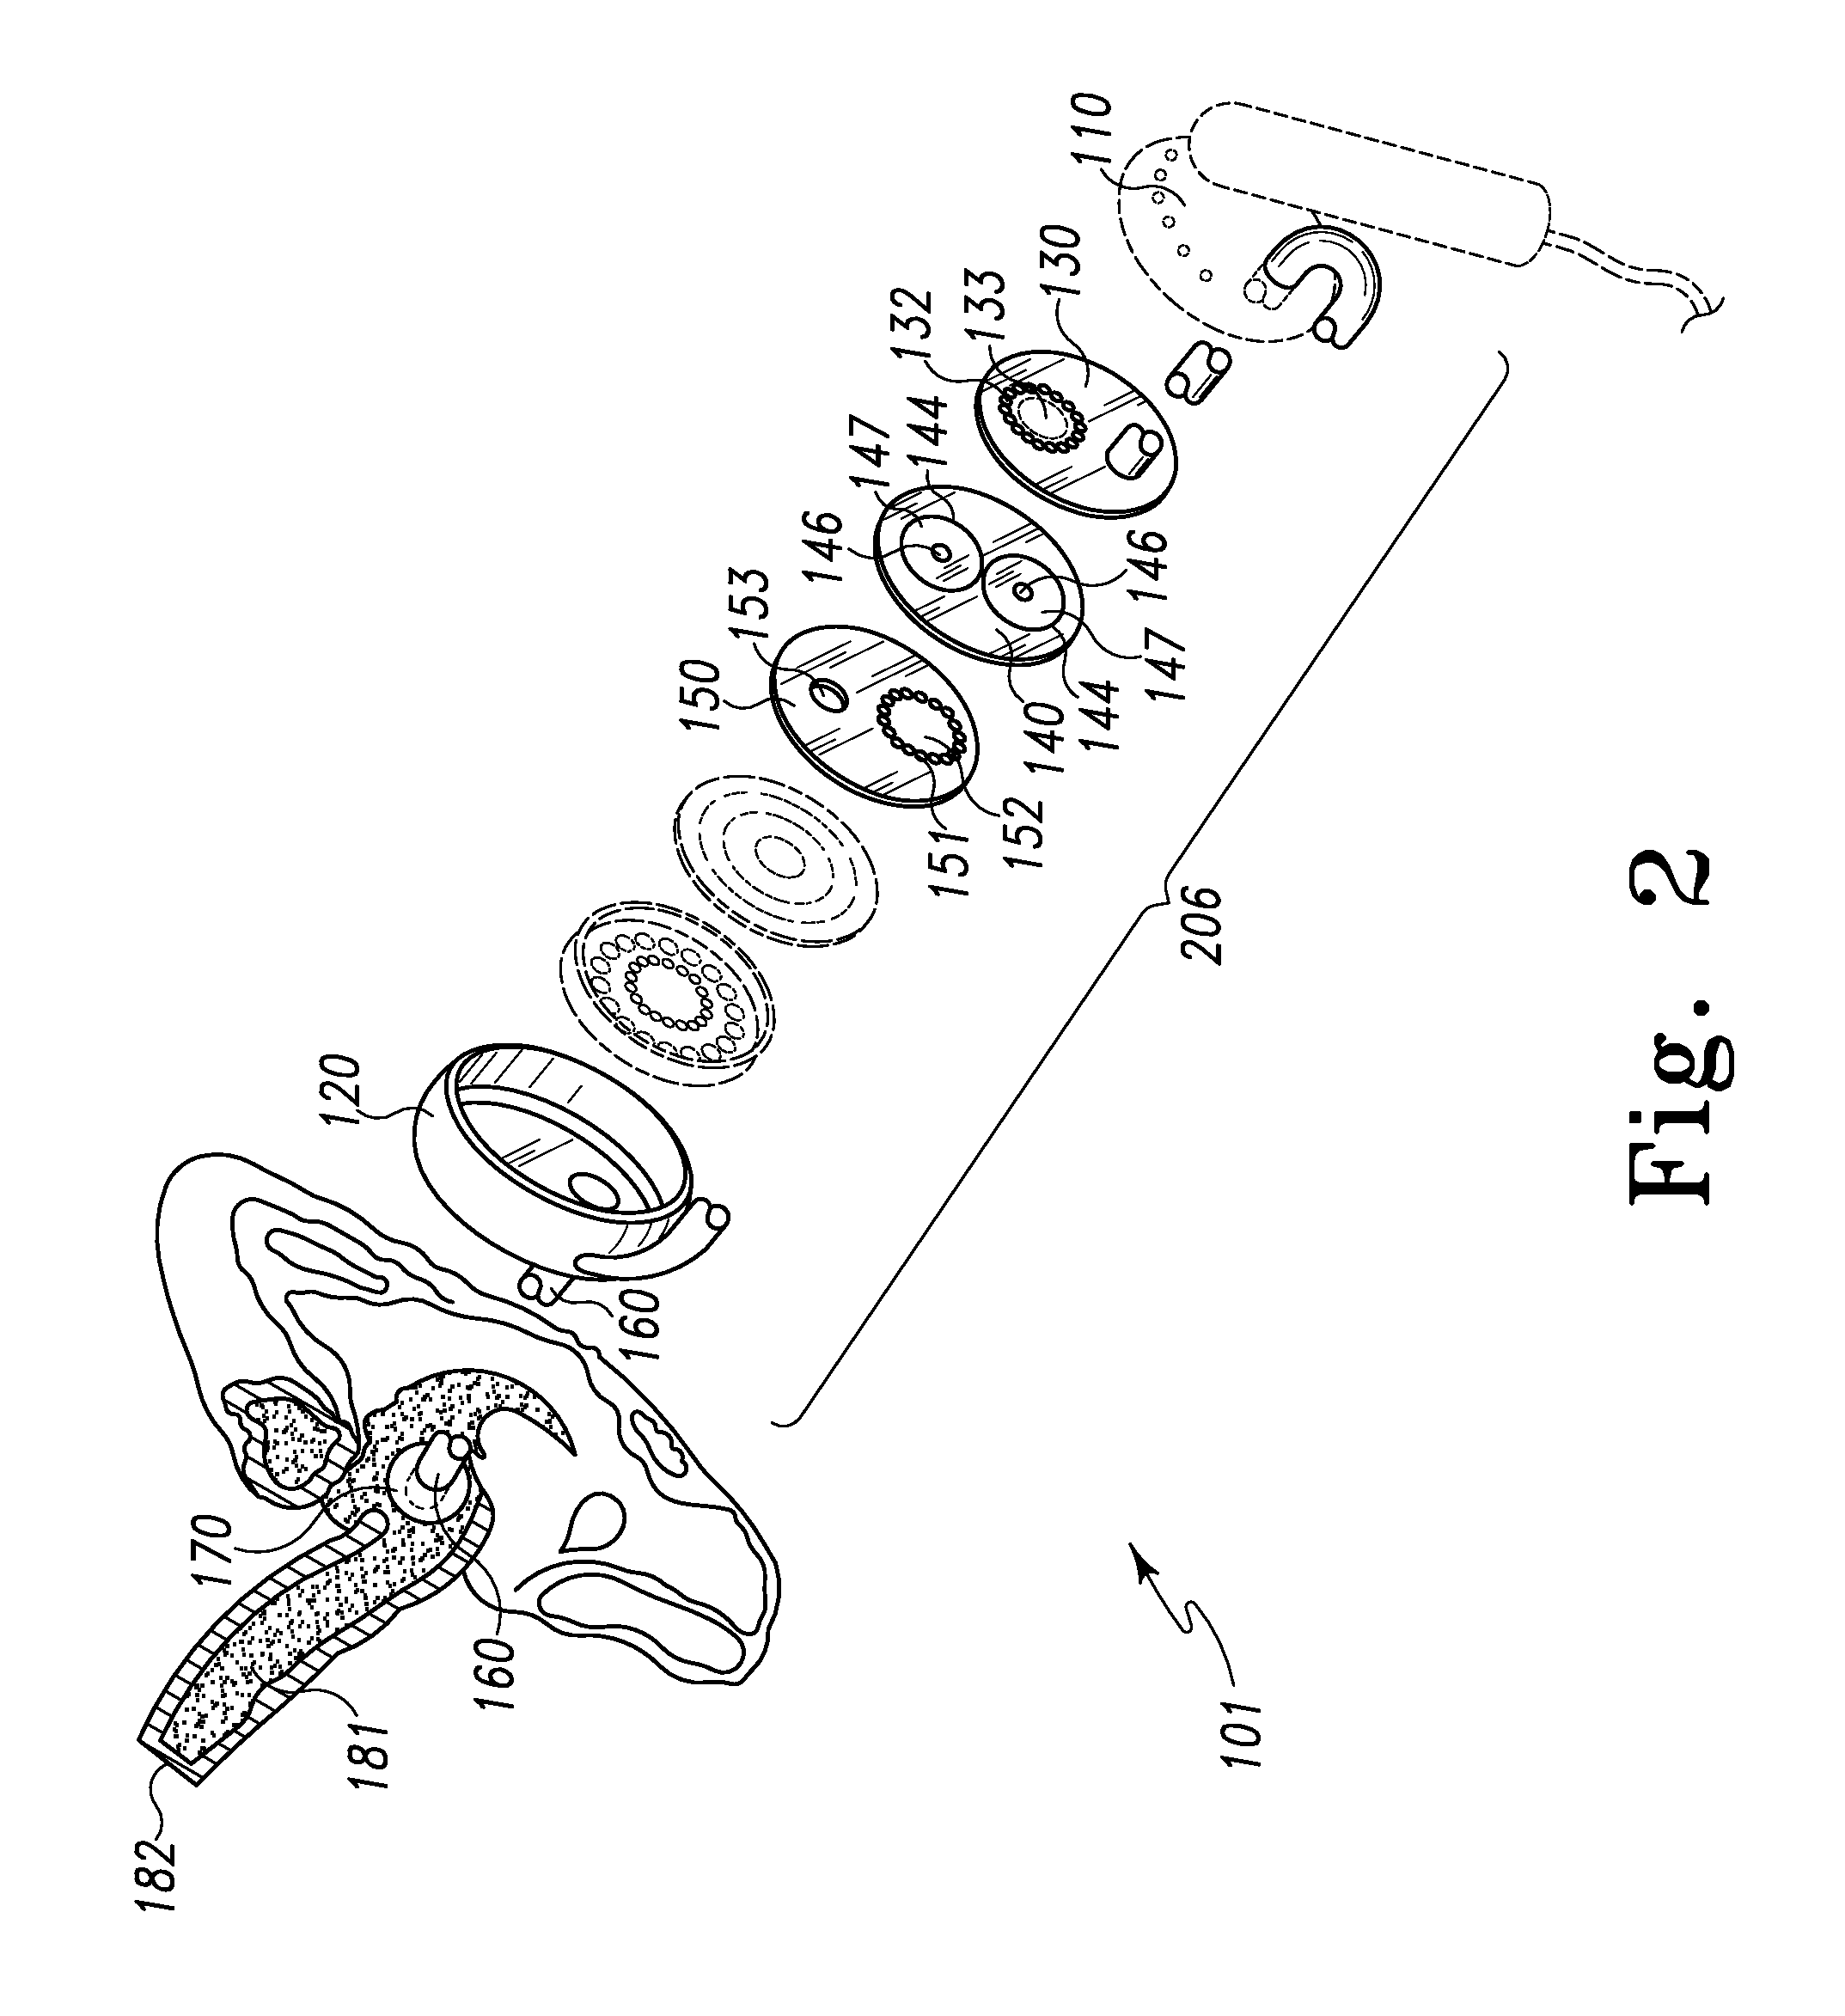 Diaphonic acoustic transduction coupler and ear bud